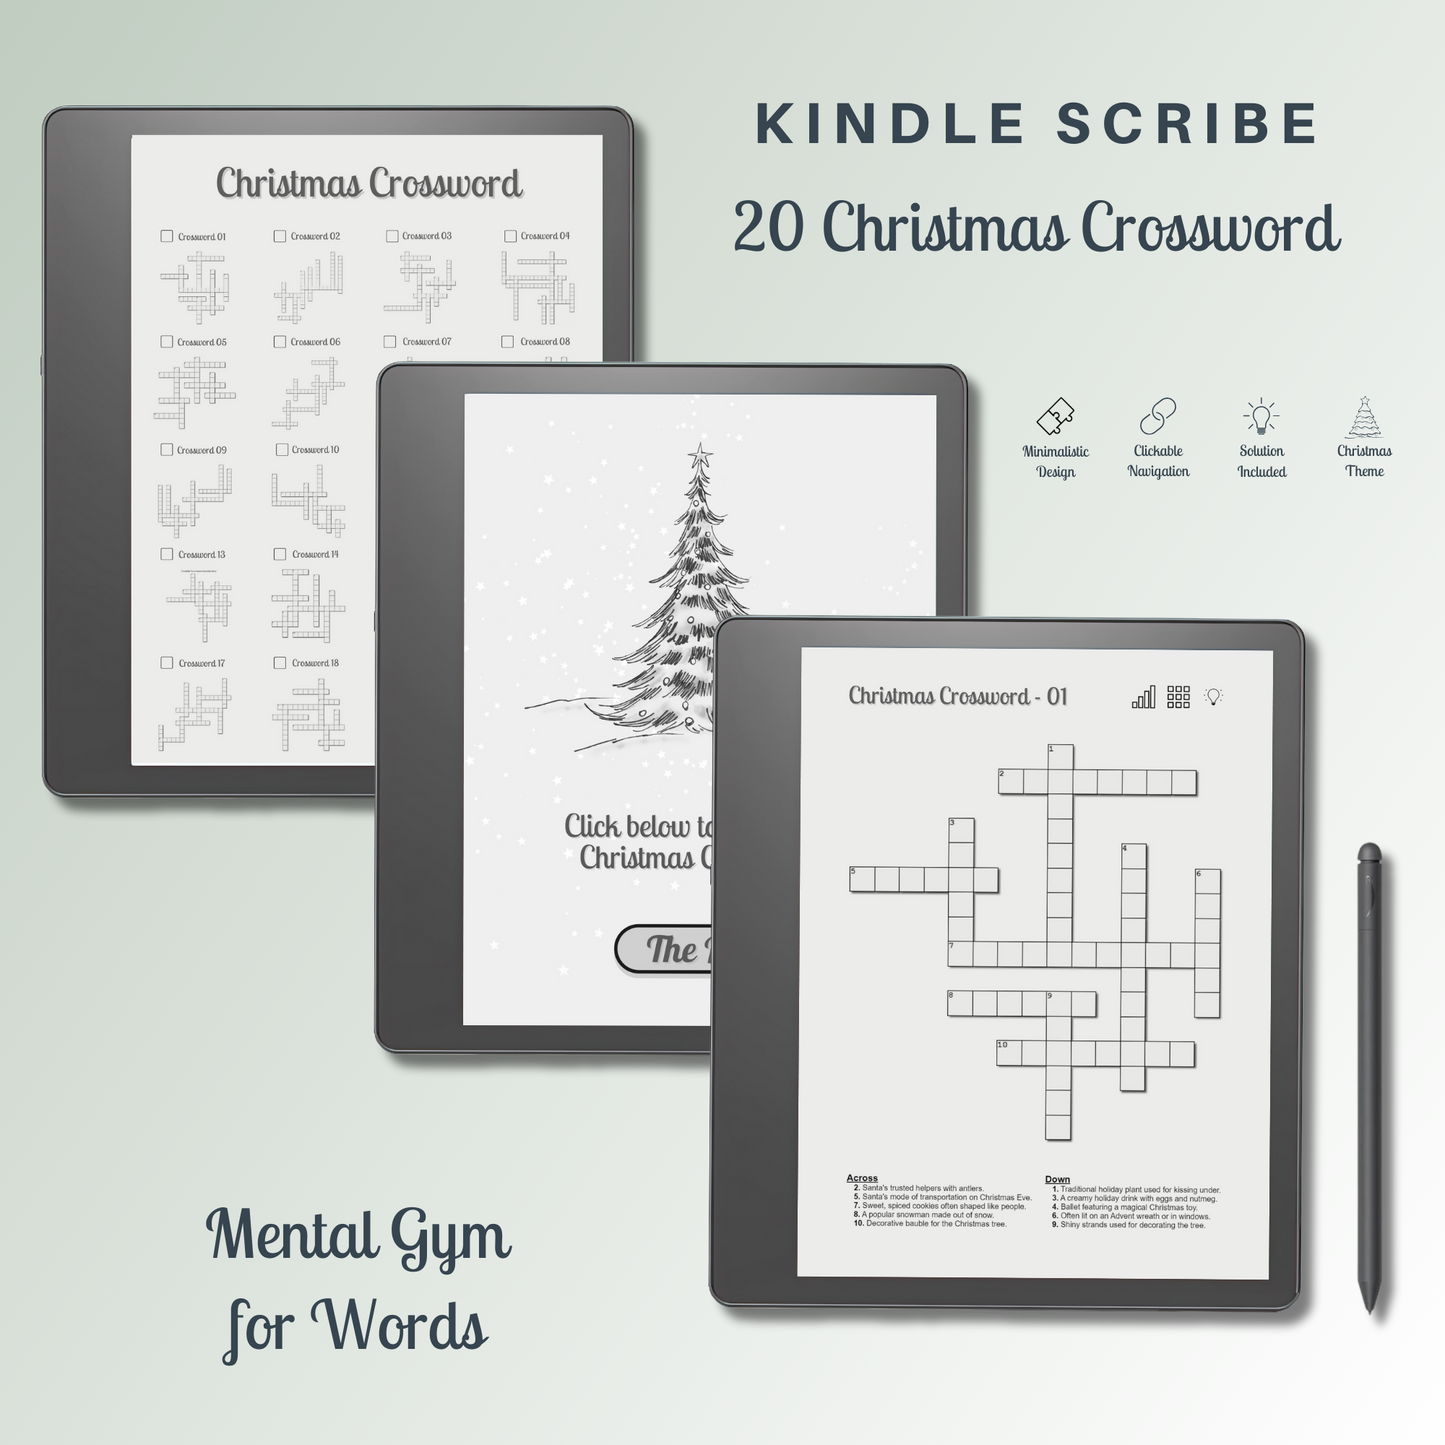 This is a Digital Download of 20 Christmas Crossword Puzzles designed for Kindle Scribe.